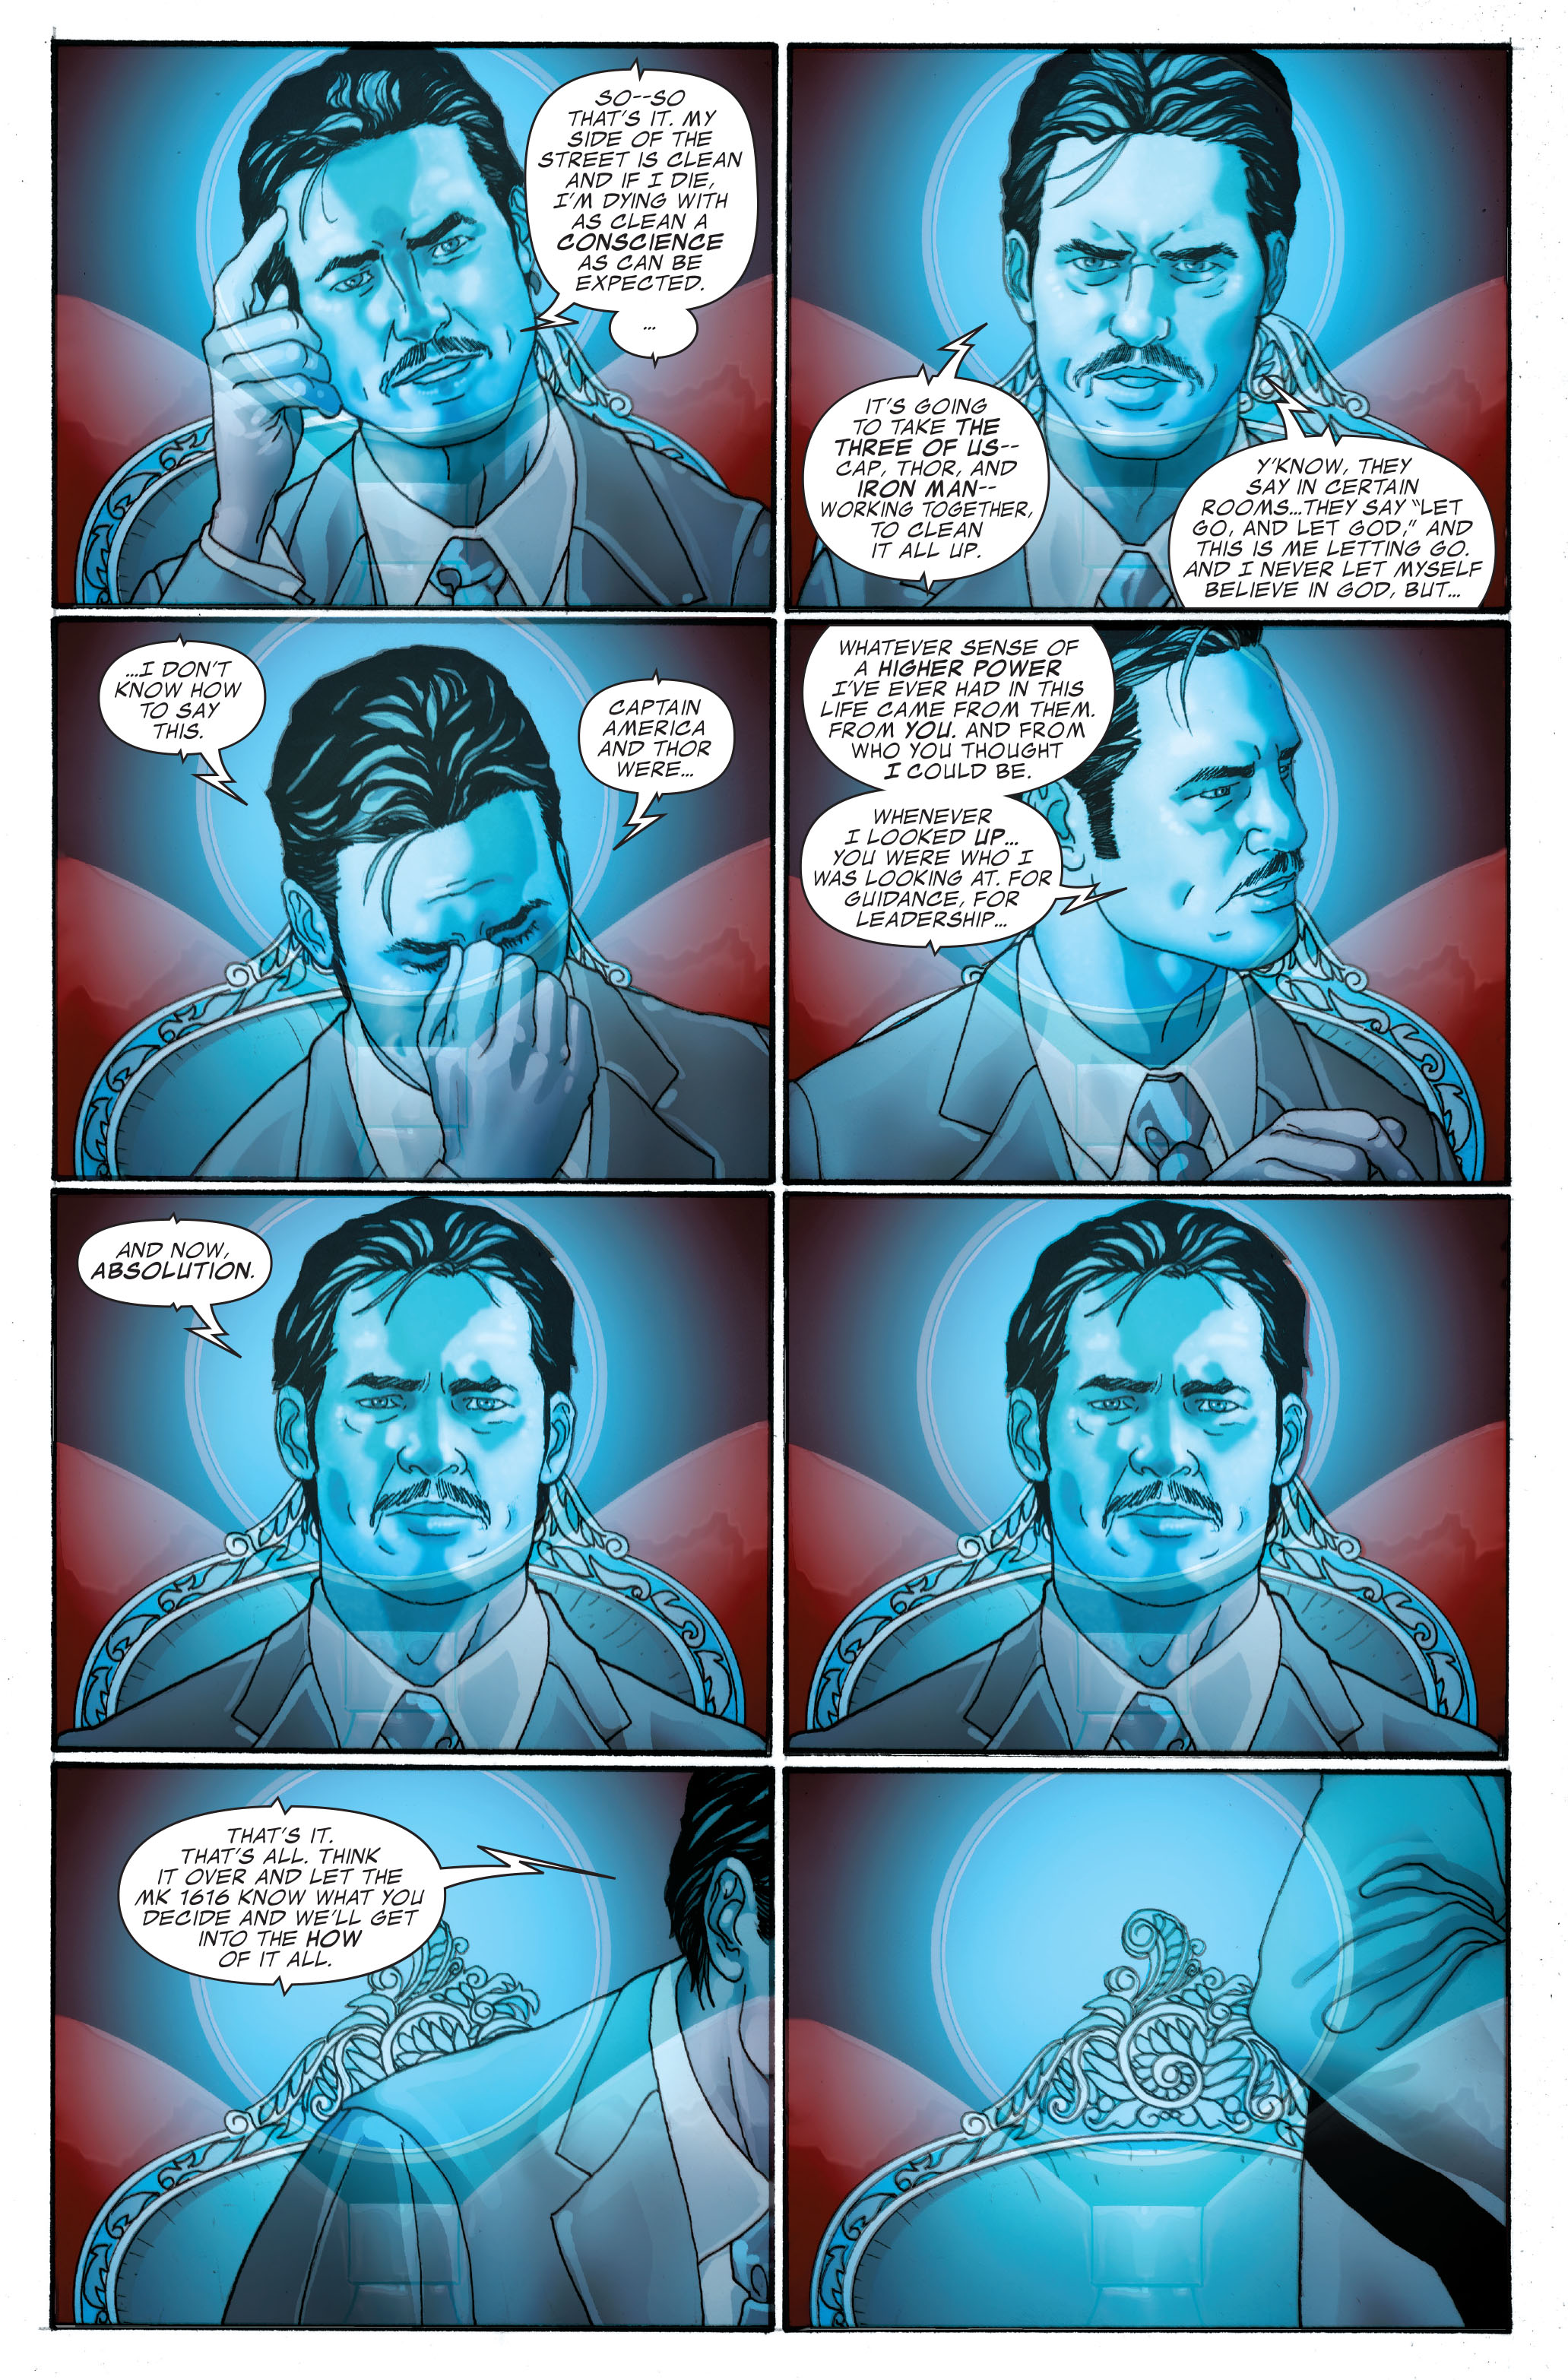 Invincible Iron Man (2008) 20 Page 8